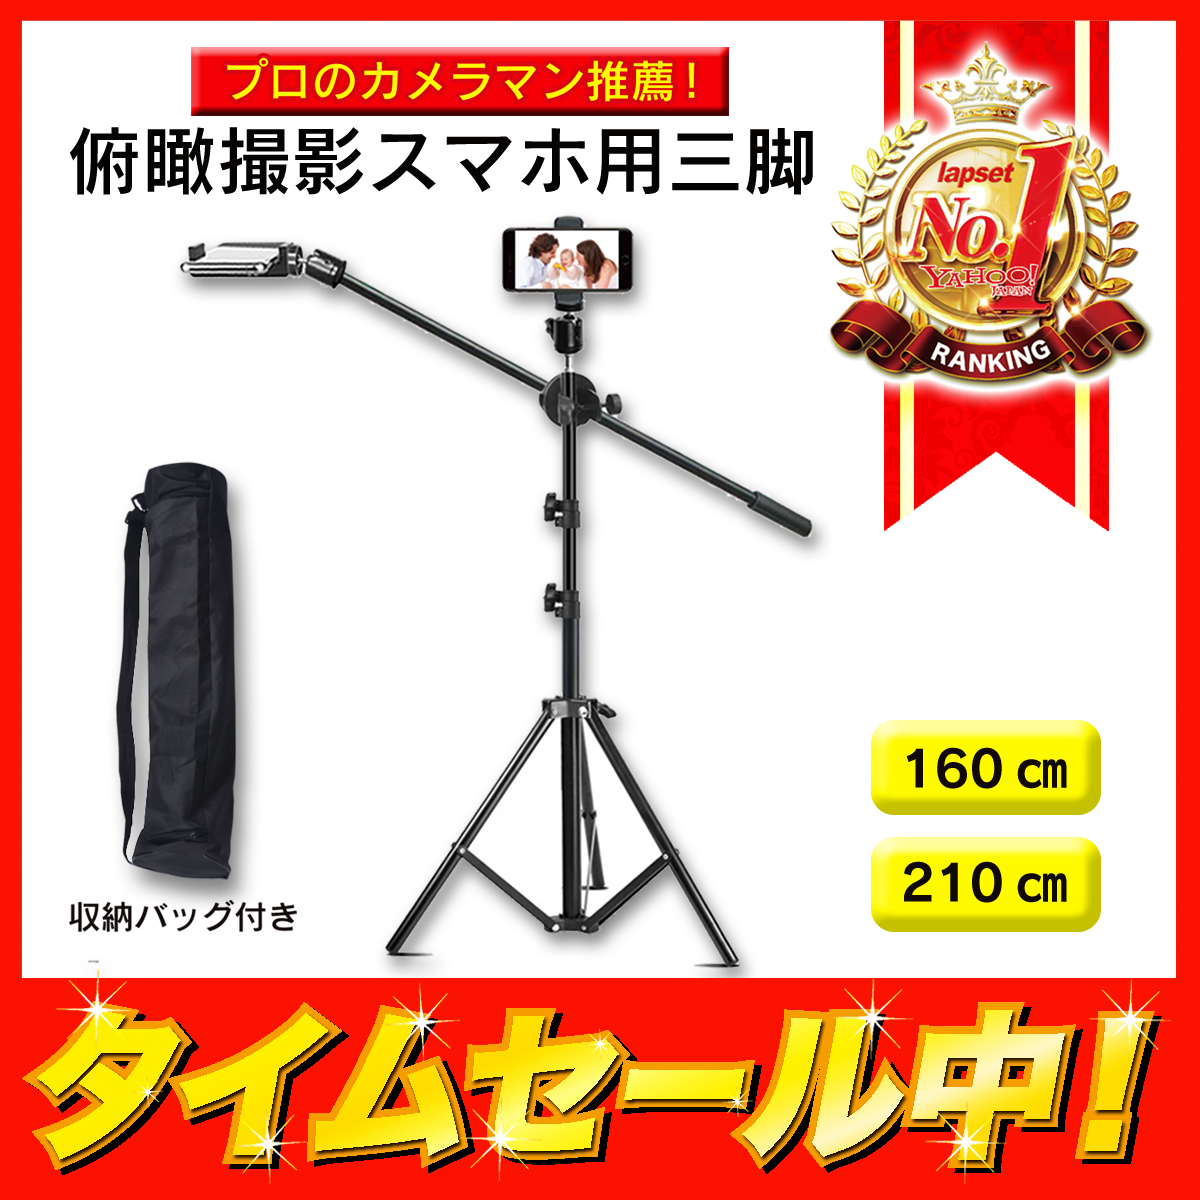 .. photographing smartphone stand tripod .. smartphone long Pro camera man .. storage sack attaching iphone cooking animation YouTube SNS TikTok is possible to choose 2 size 210cm 160cm free shipping 